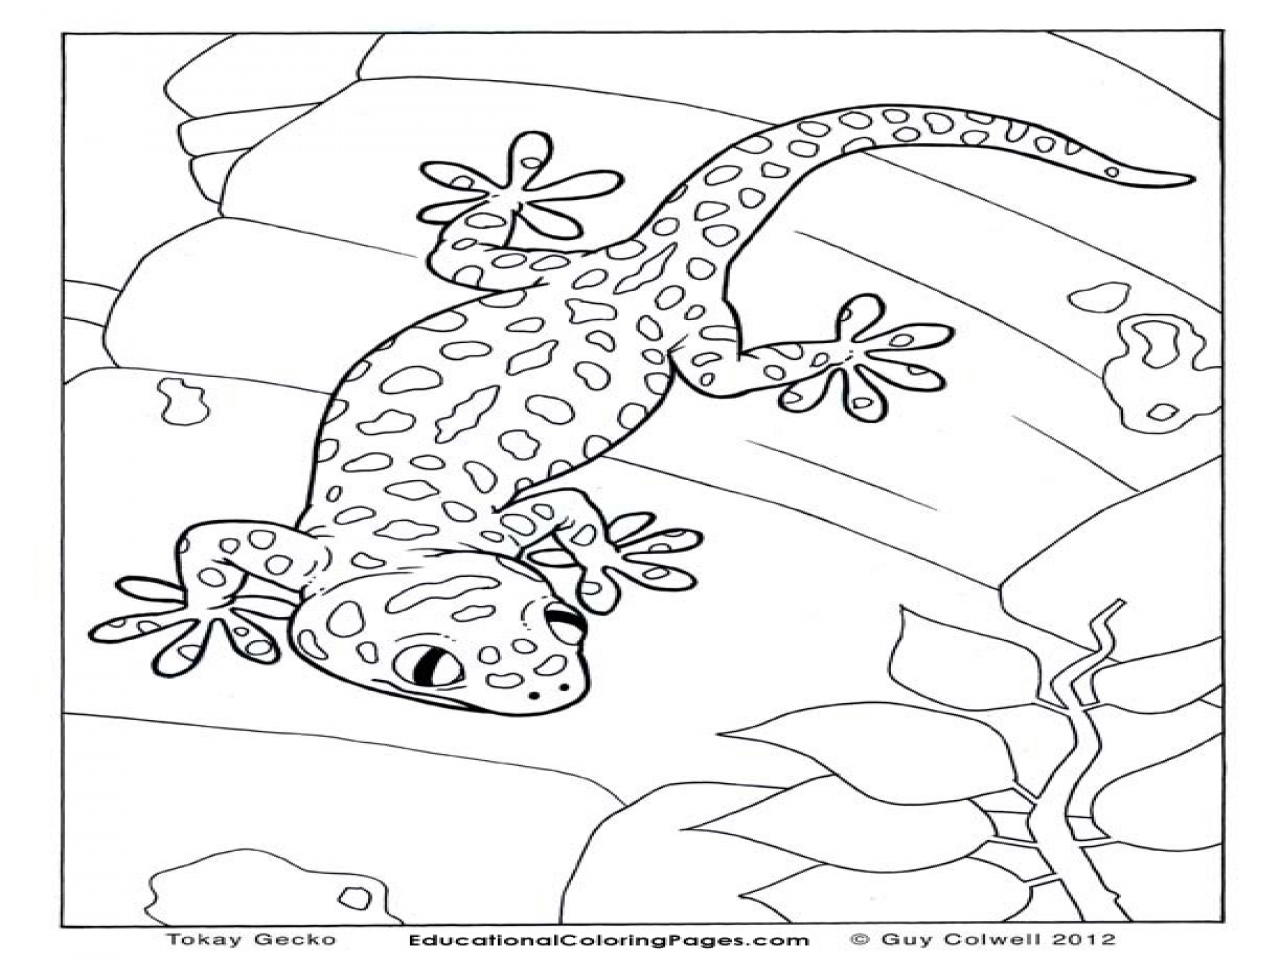 Leopard Gecko Coloring Pages At Getdrawings Free Download